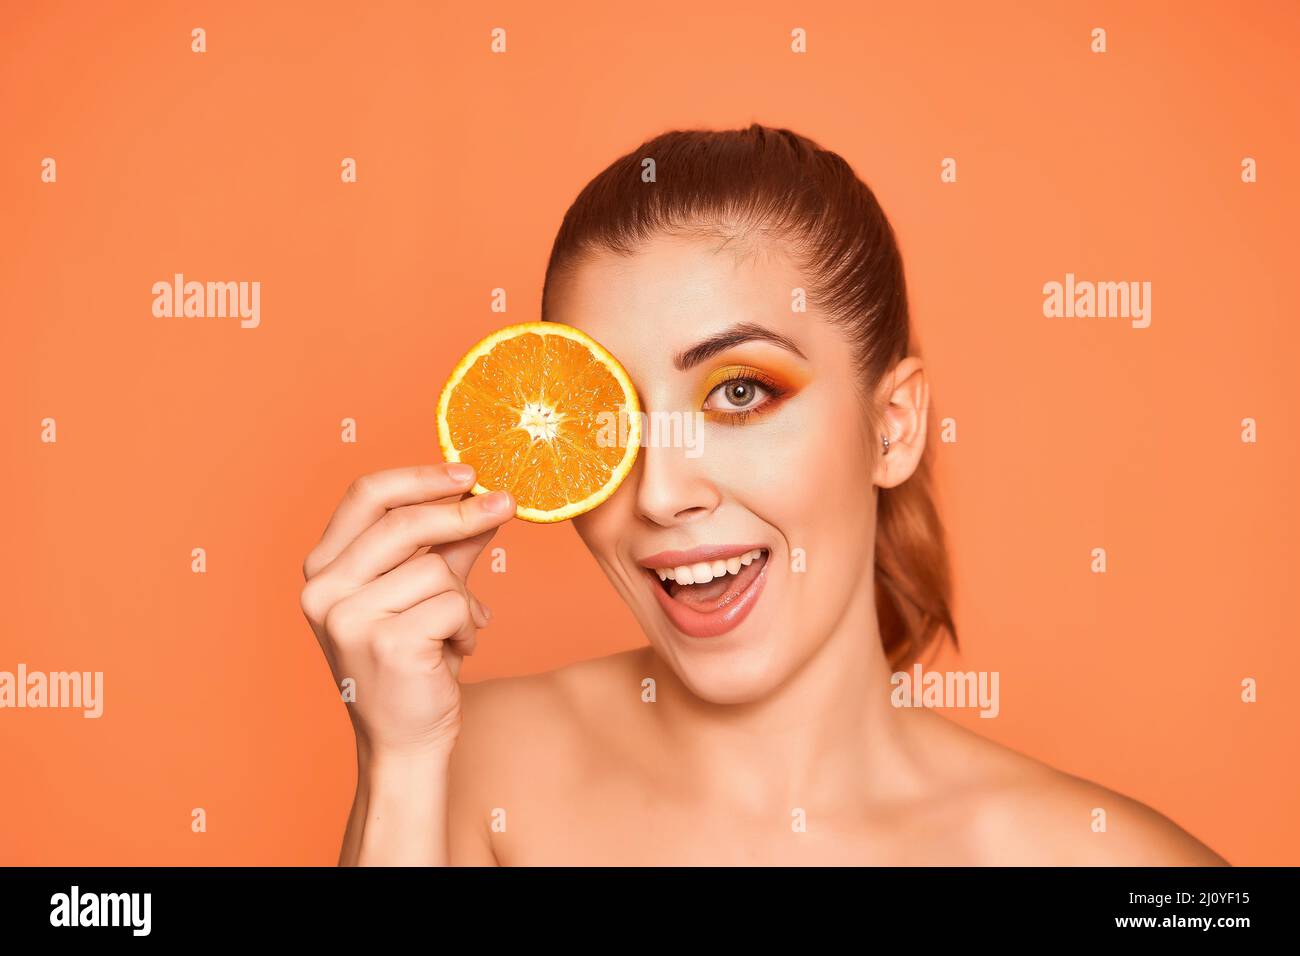 Closeup portrait of beautiful smiling girl , holding half of oranges near face, isolated on orange background. Beauty and health care concept. High quality photo.  Stock Photo